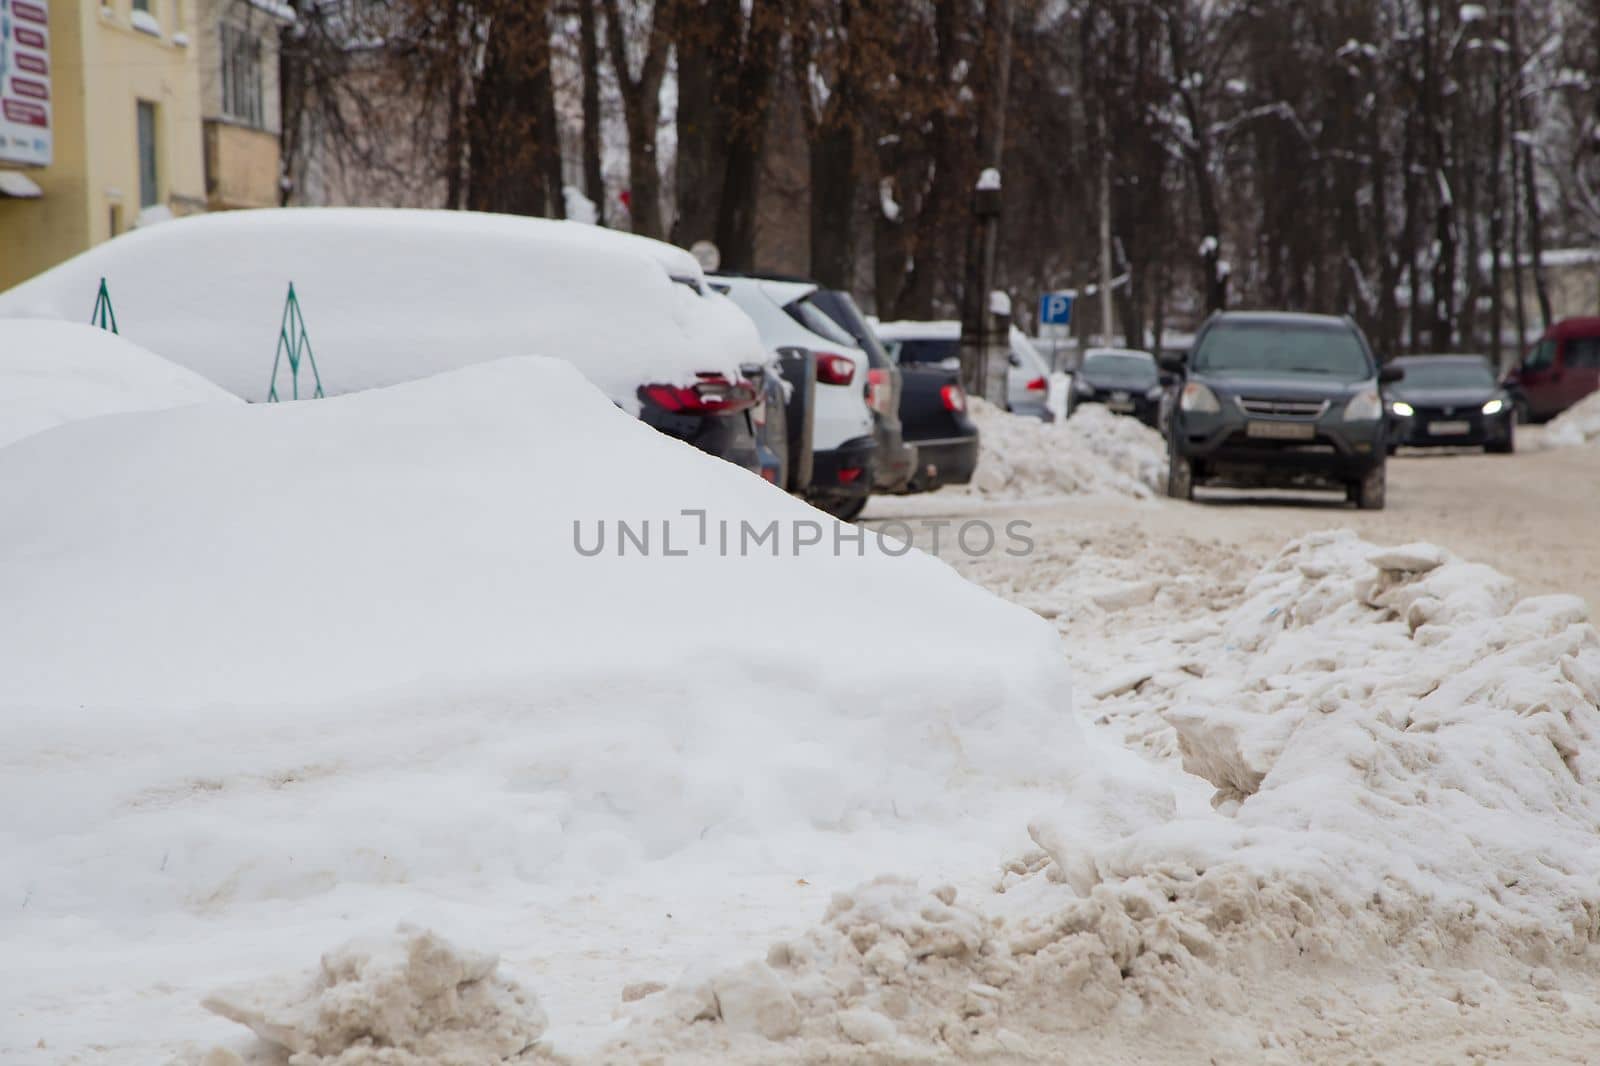 A large snowdrift against the backdrop of a city street with cars. On the road lies white snow in high heaps. Urban winter landscape. Cloudy winter day, soft light.